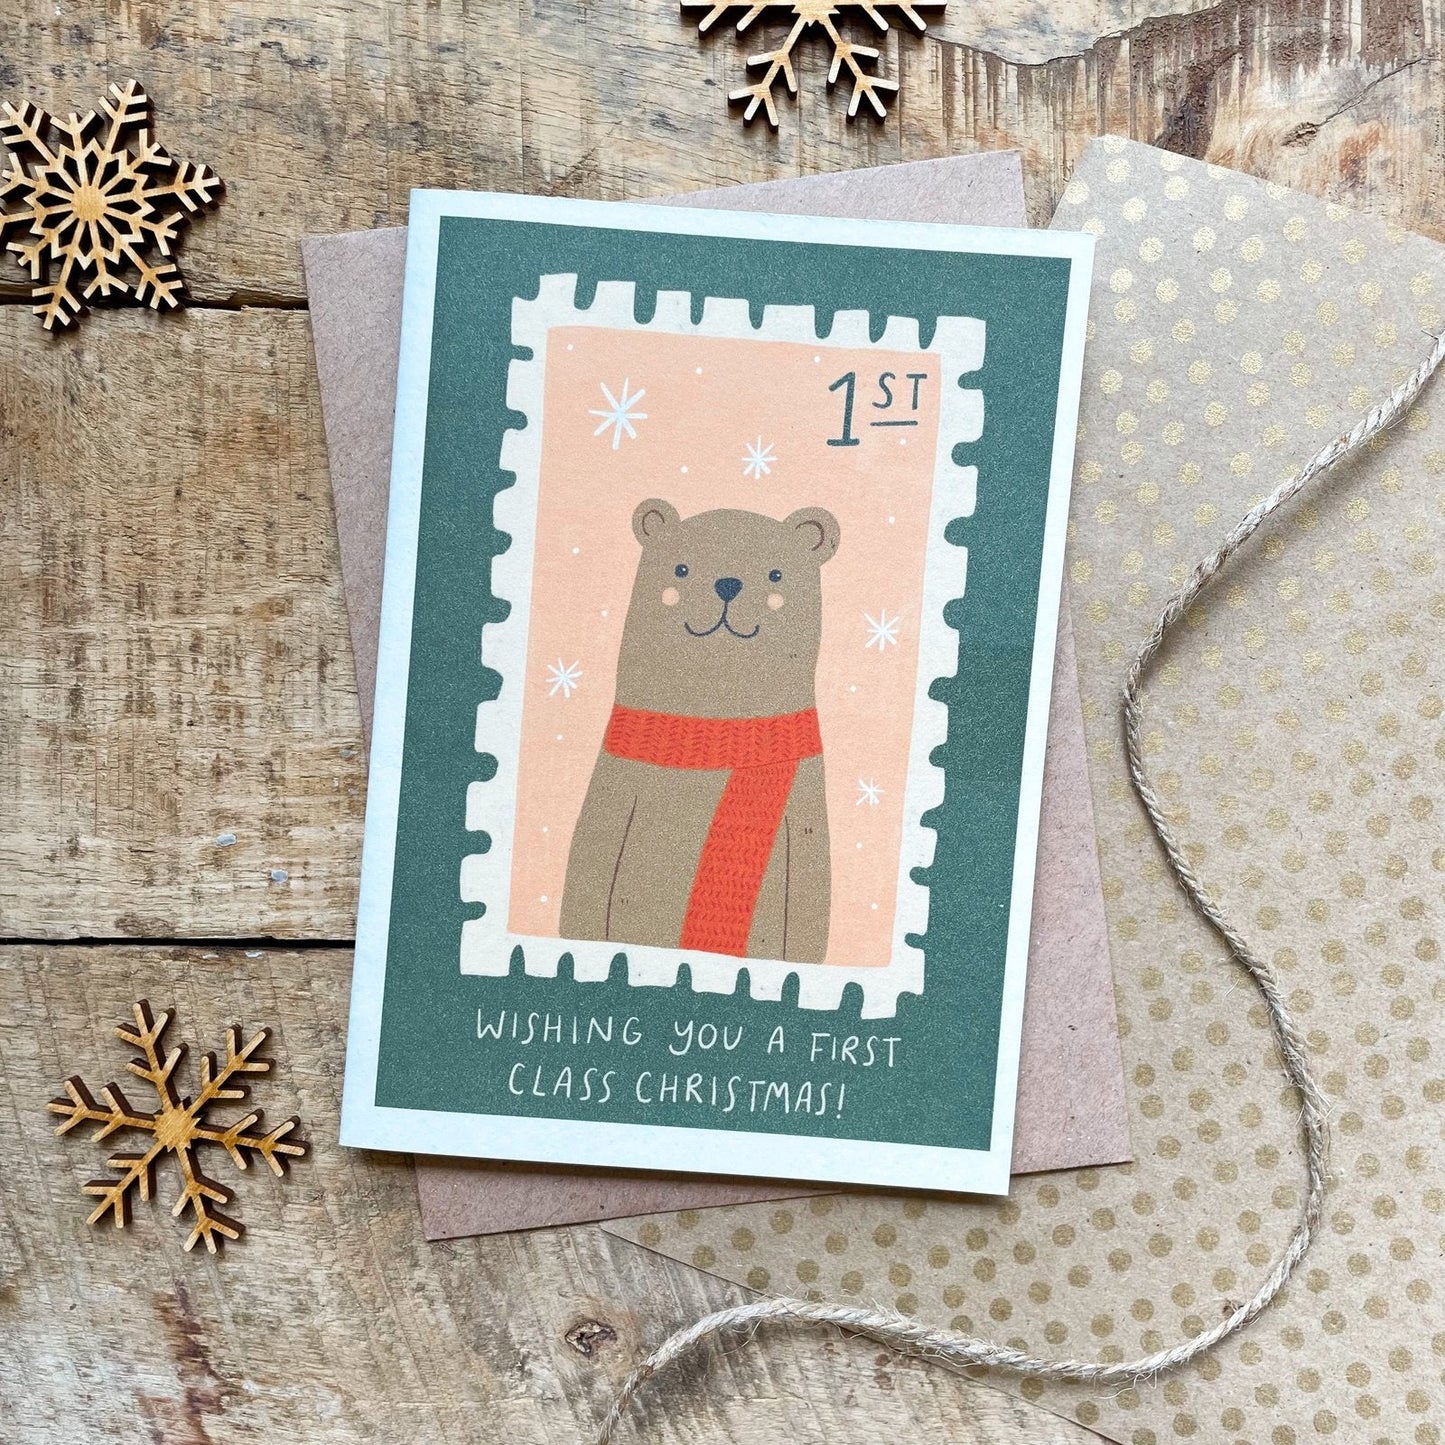 'First Class Christmas' Recycled Coffee Cup Christmas Card